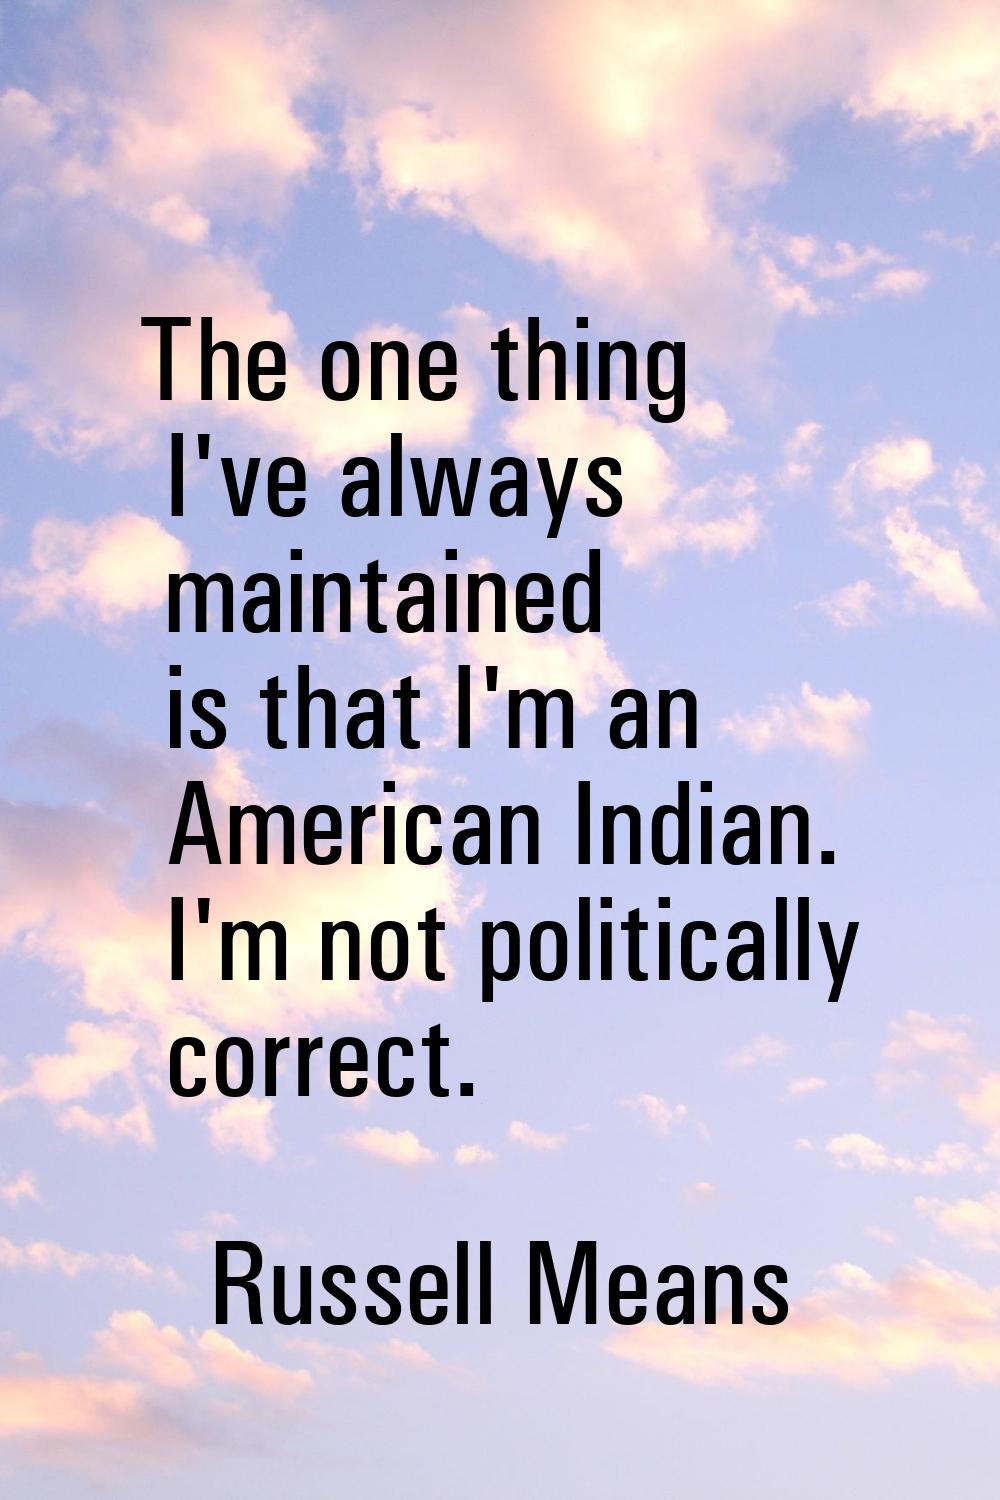 The one thing I've always maintained is that I'm an American Indian. I'm not politically correct.